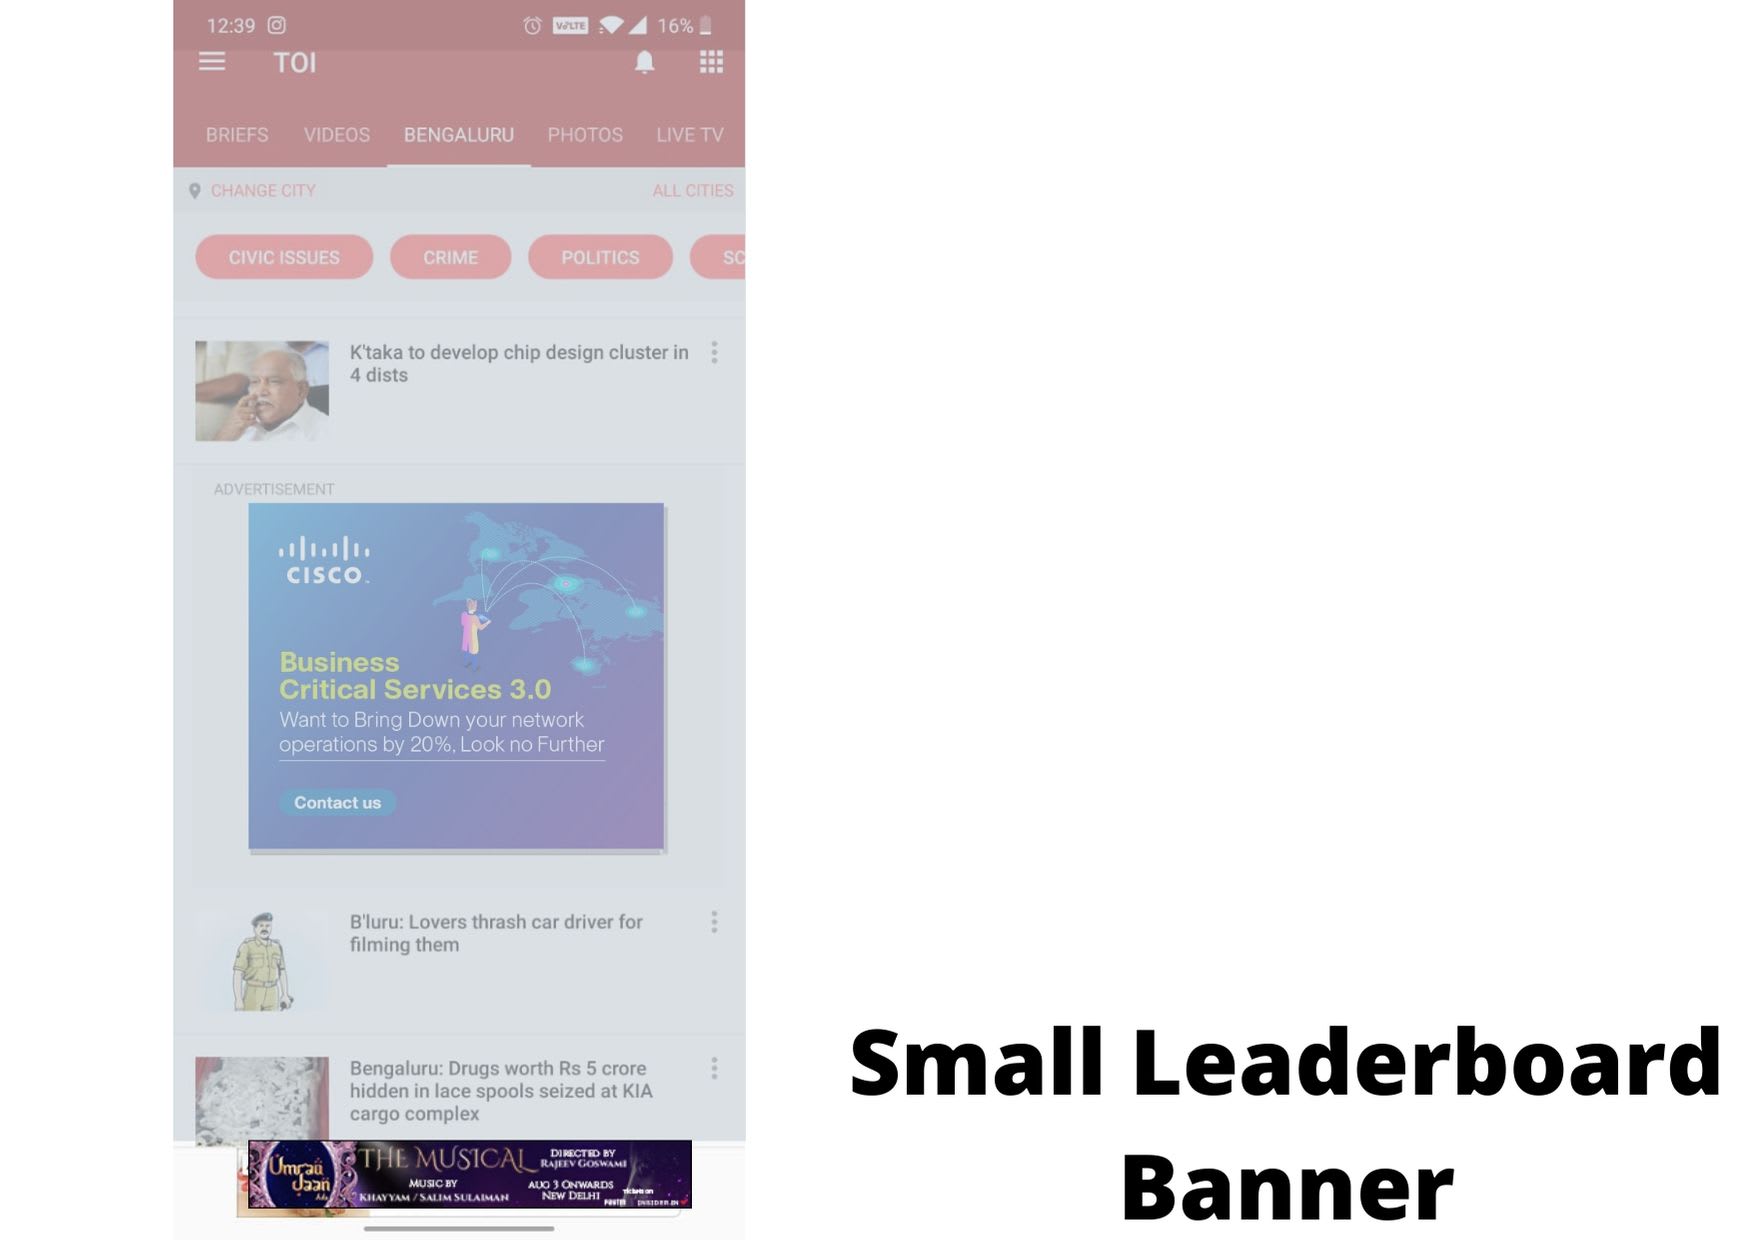 Small Leaderboard Banner